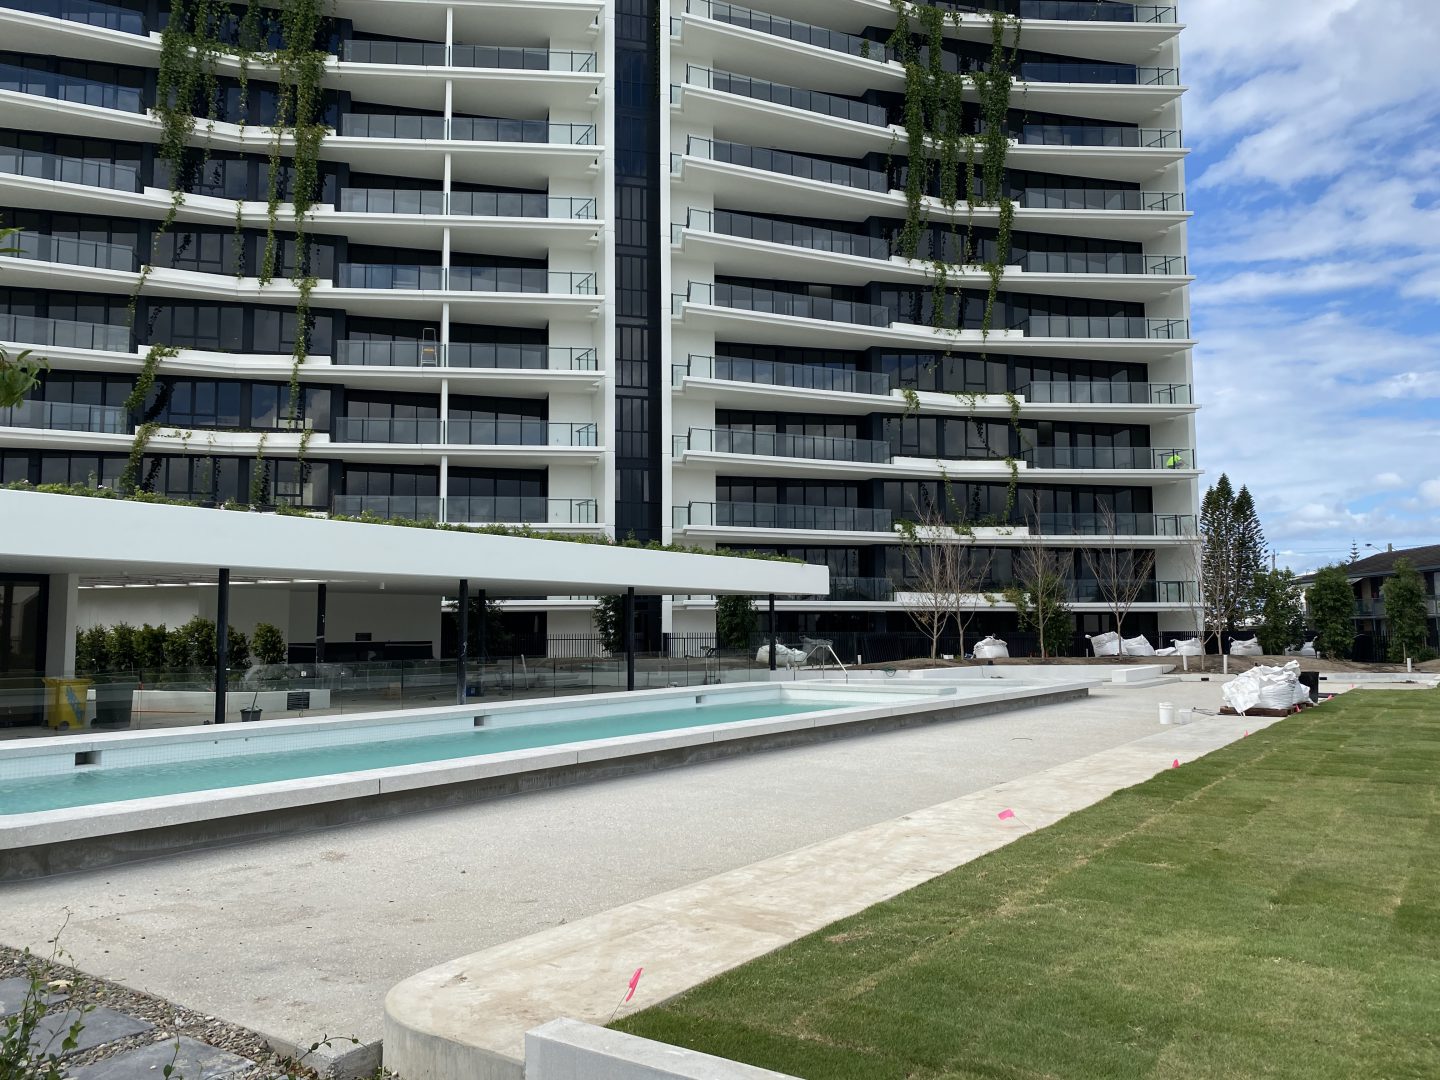 Magnoli Apartments Construction Update April 2020 (image supplied by the developer)2